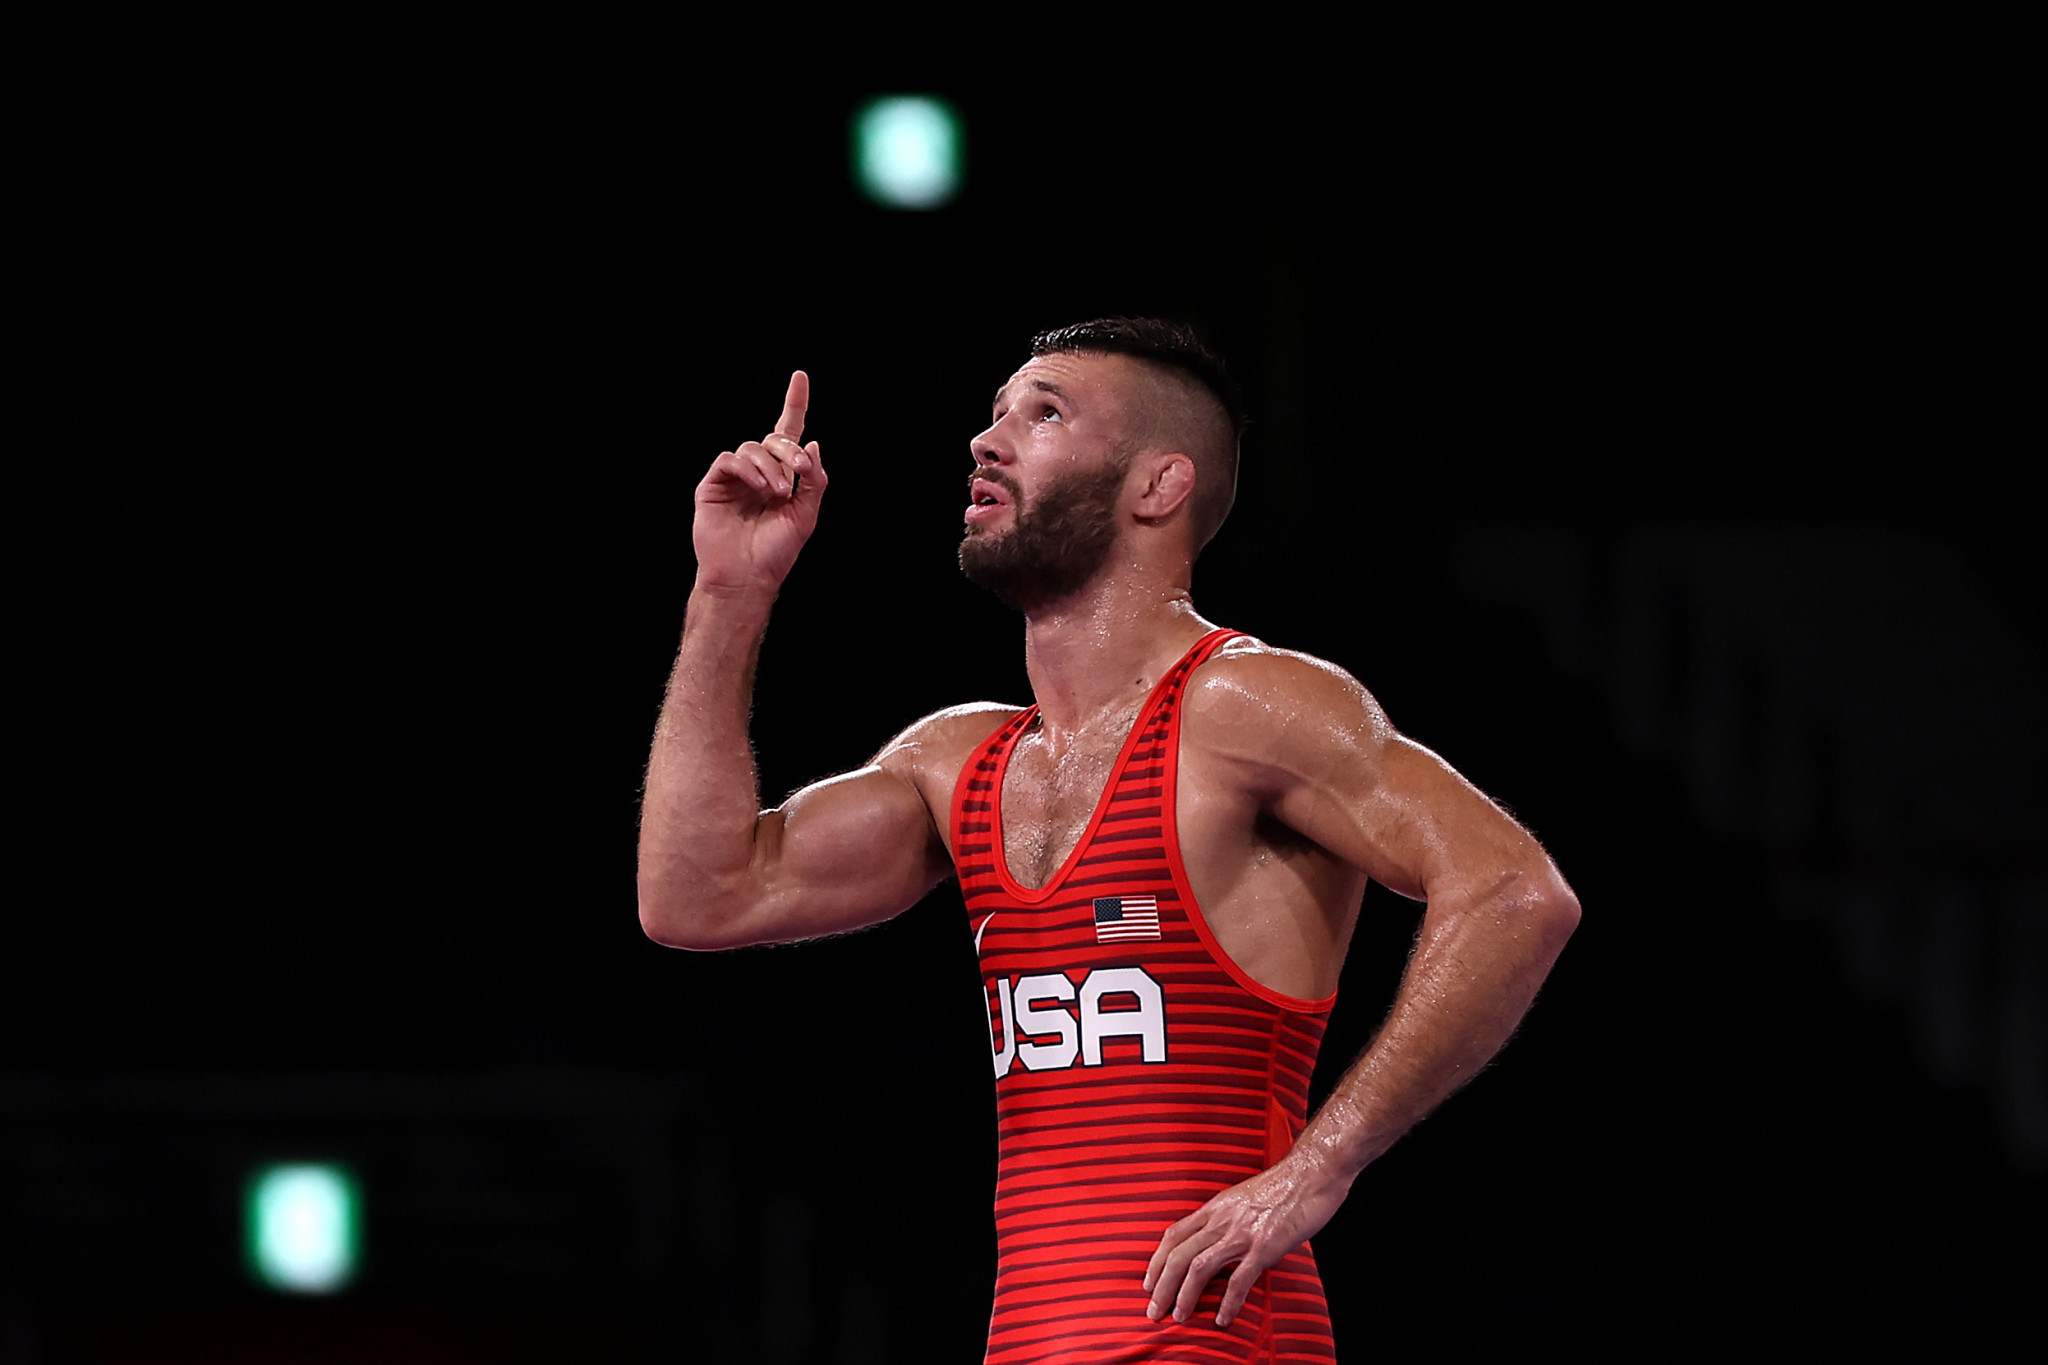 Reigning world champion and Tokyo 2020 bronze medallist Thomas Gilman is among the American stars featuring at the Pan American Championships ©Getty Images